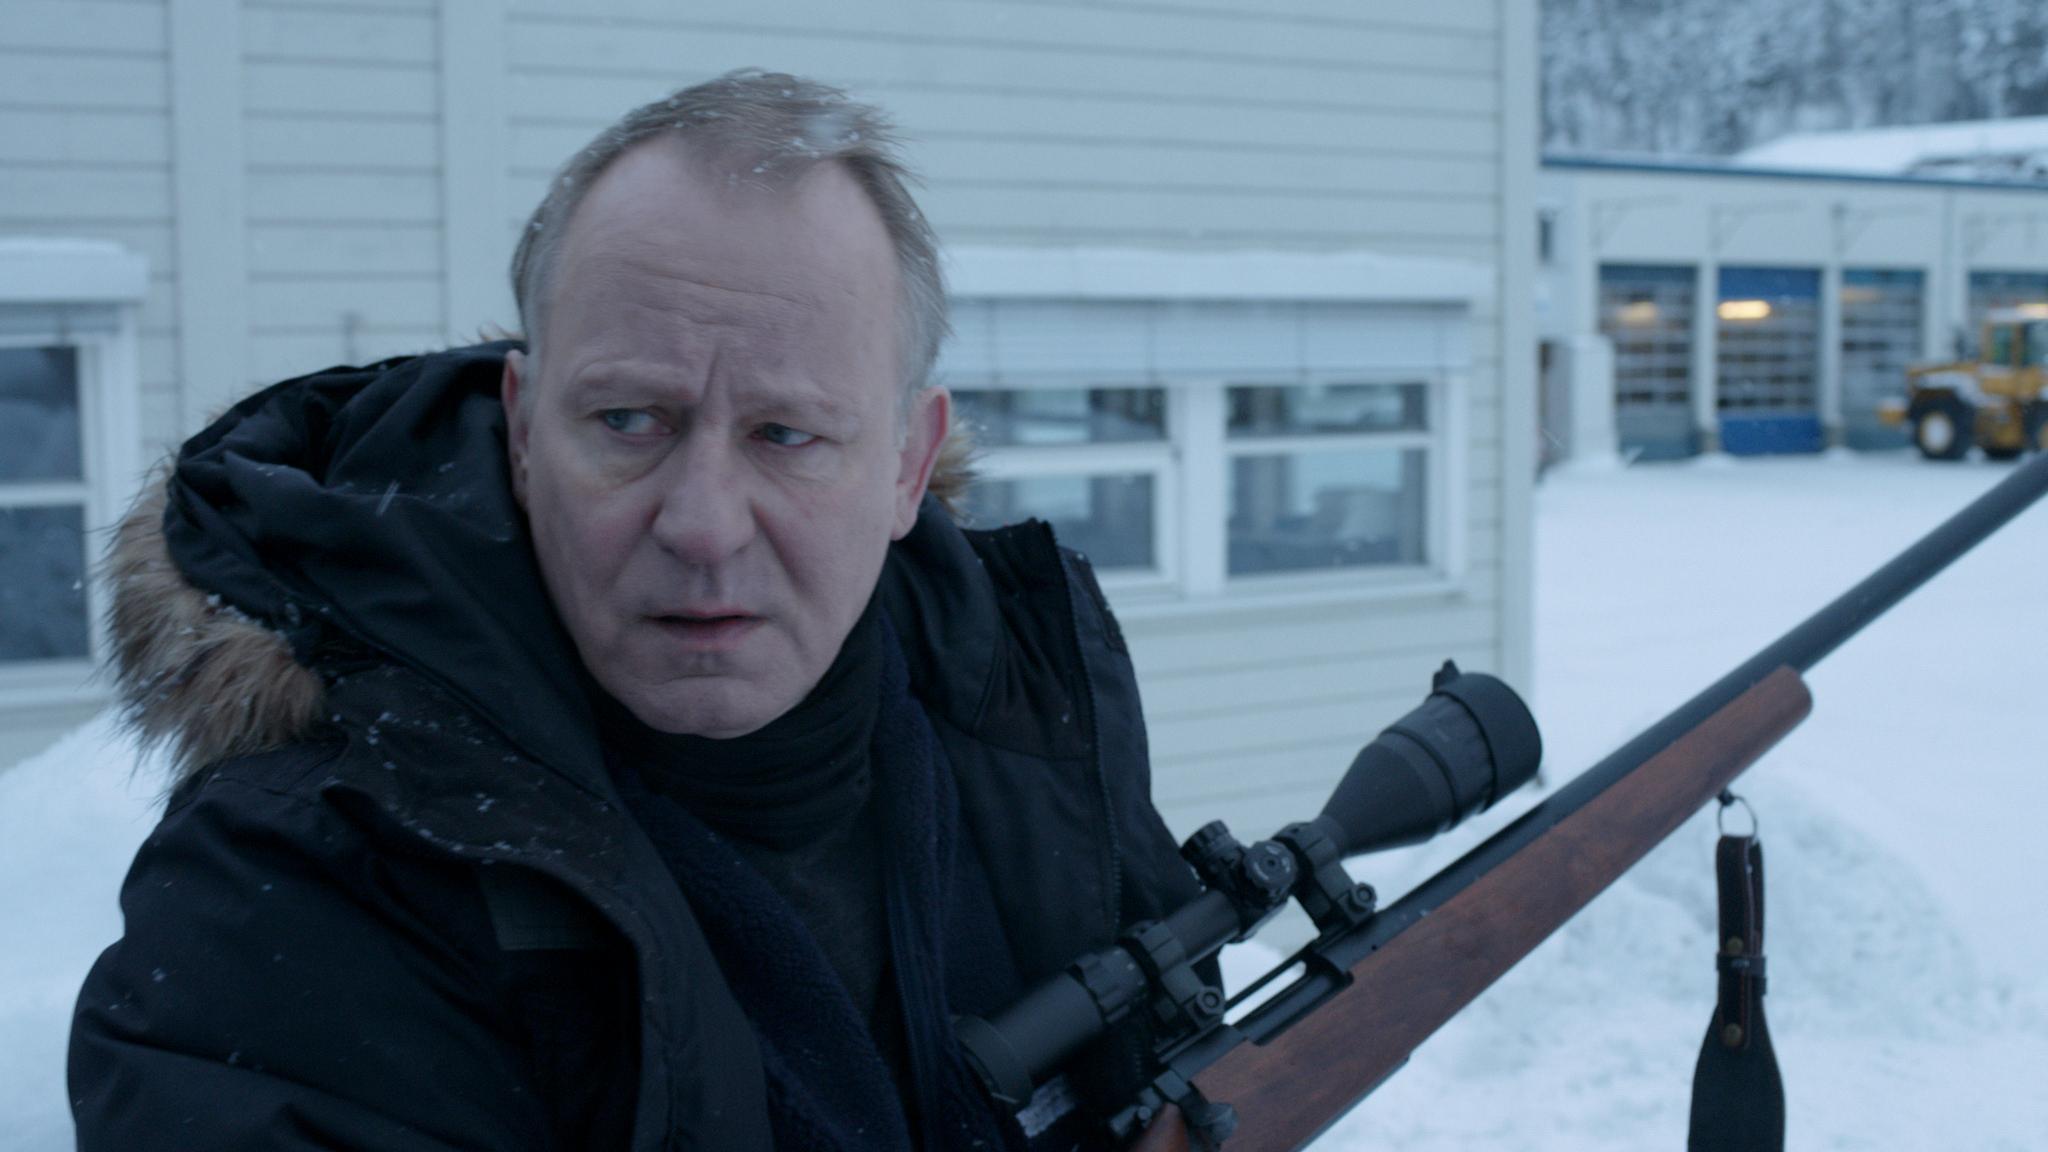 Stellan Skarsgard plays a mild-mannered snowplow driver in this entertaining if grisly piece